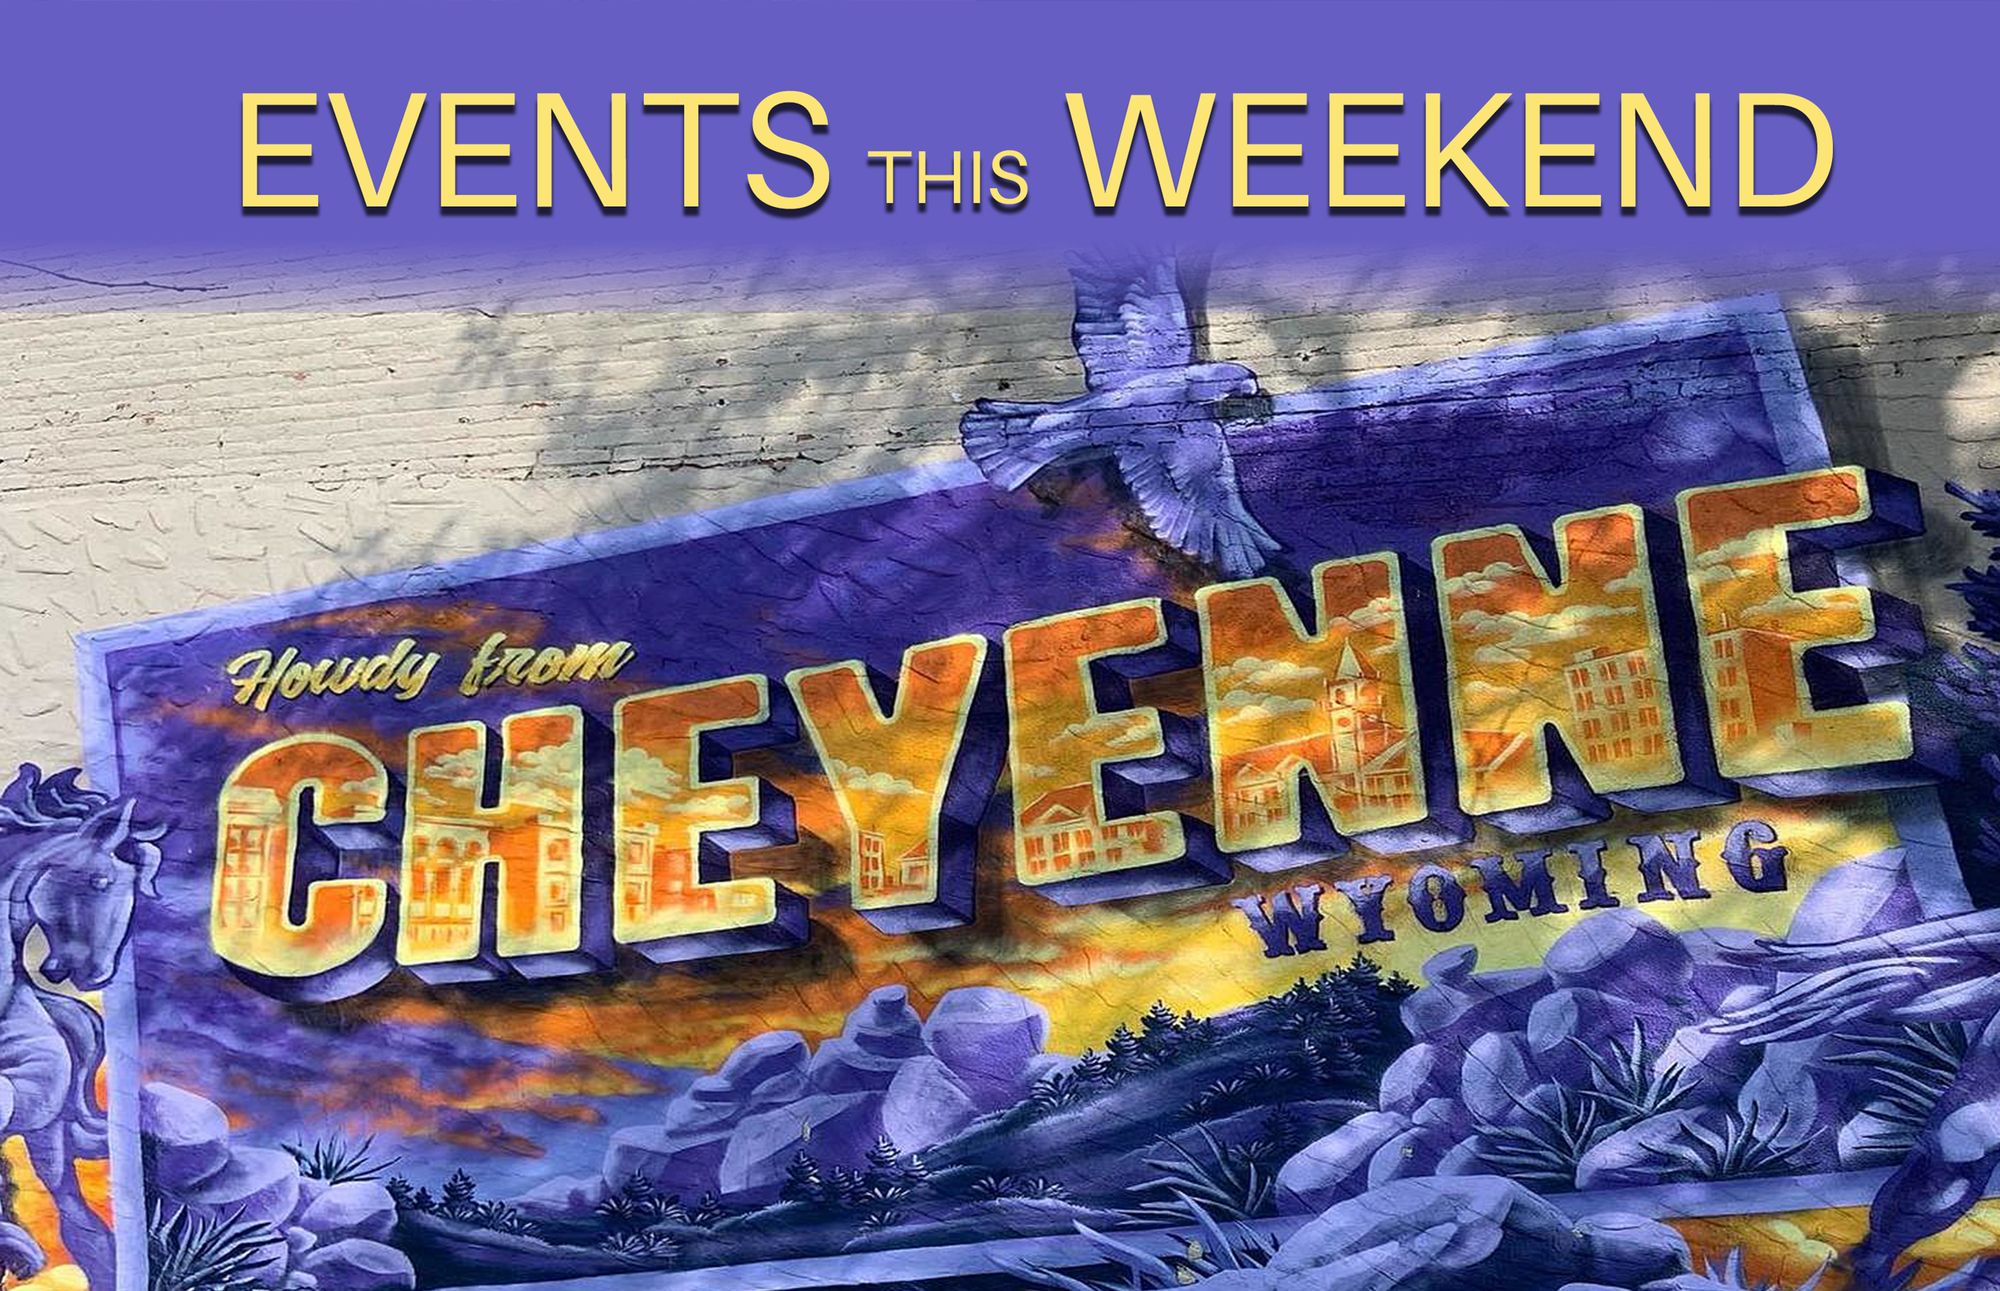 Take A Look At The Variety Of Fun Events Happening This Weekend